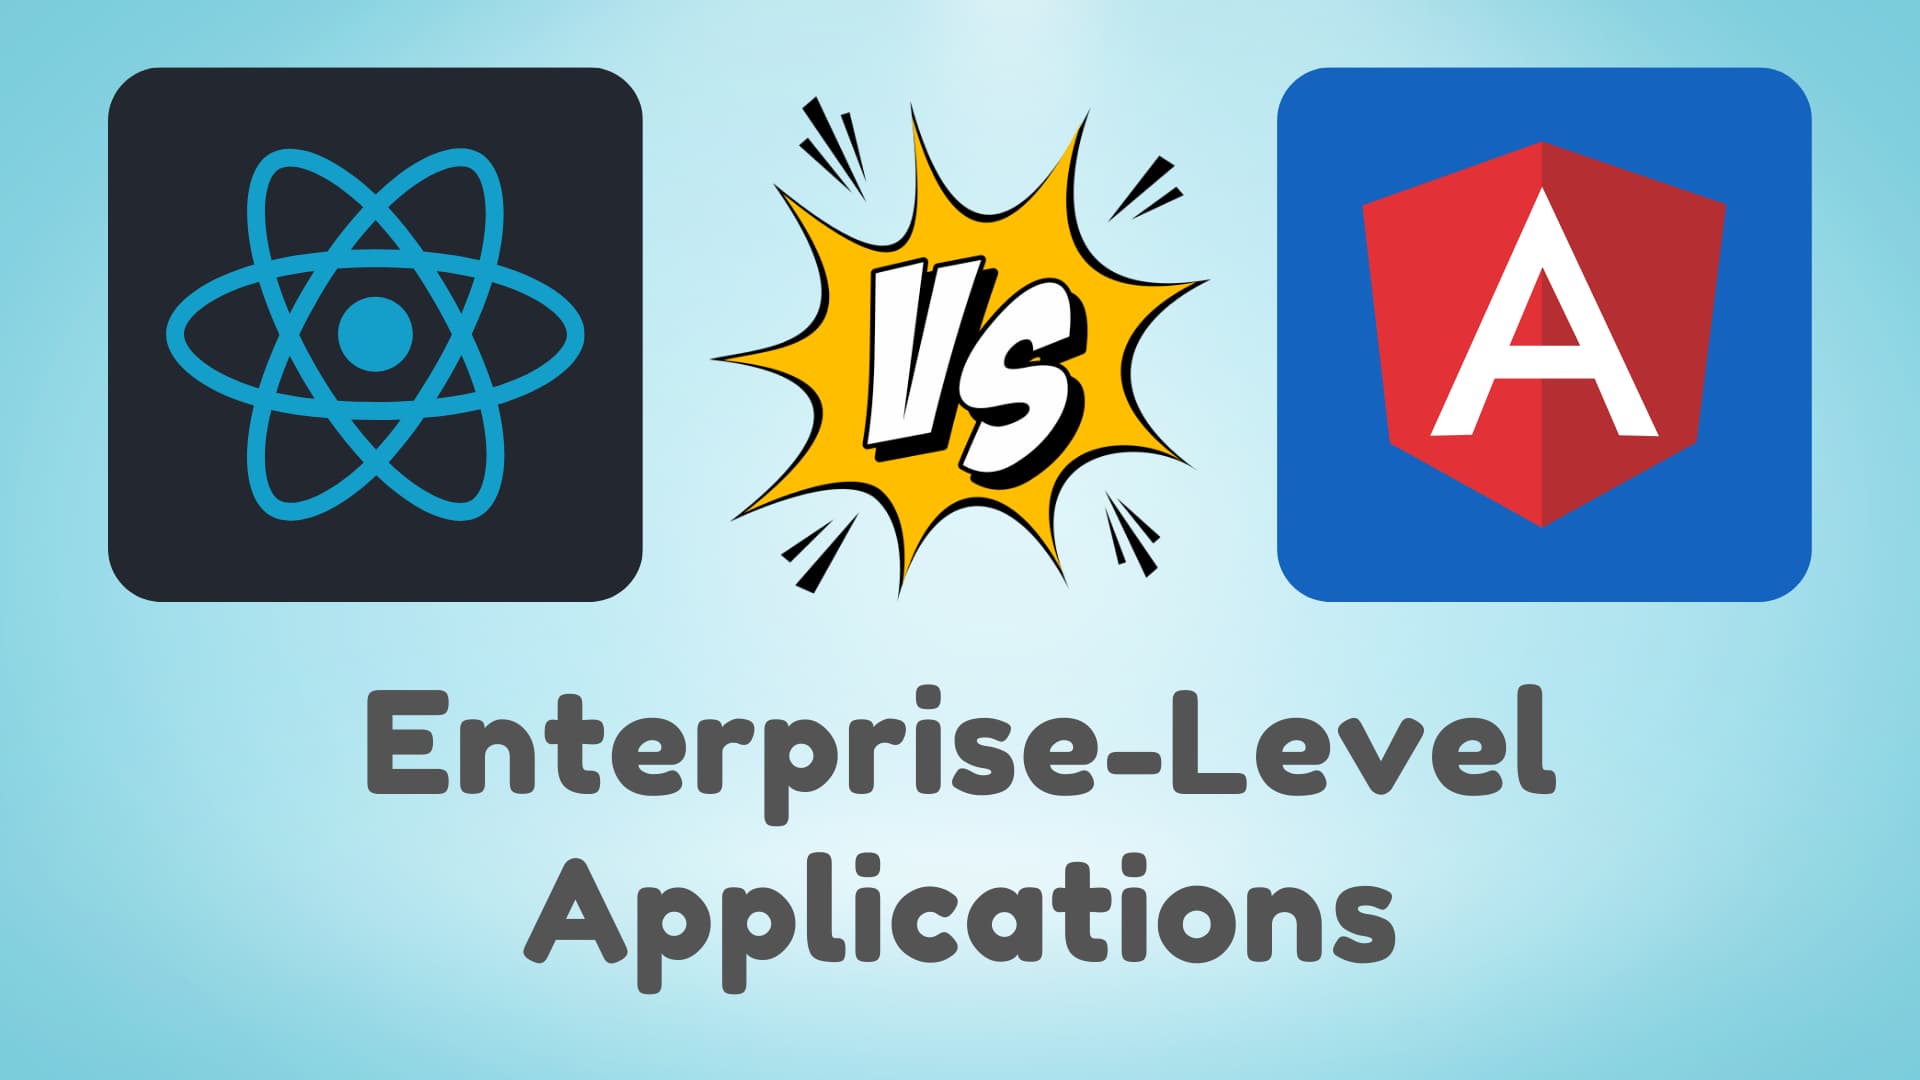 Why Angular is the Preferred Choice for Enterprise-Level Applications